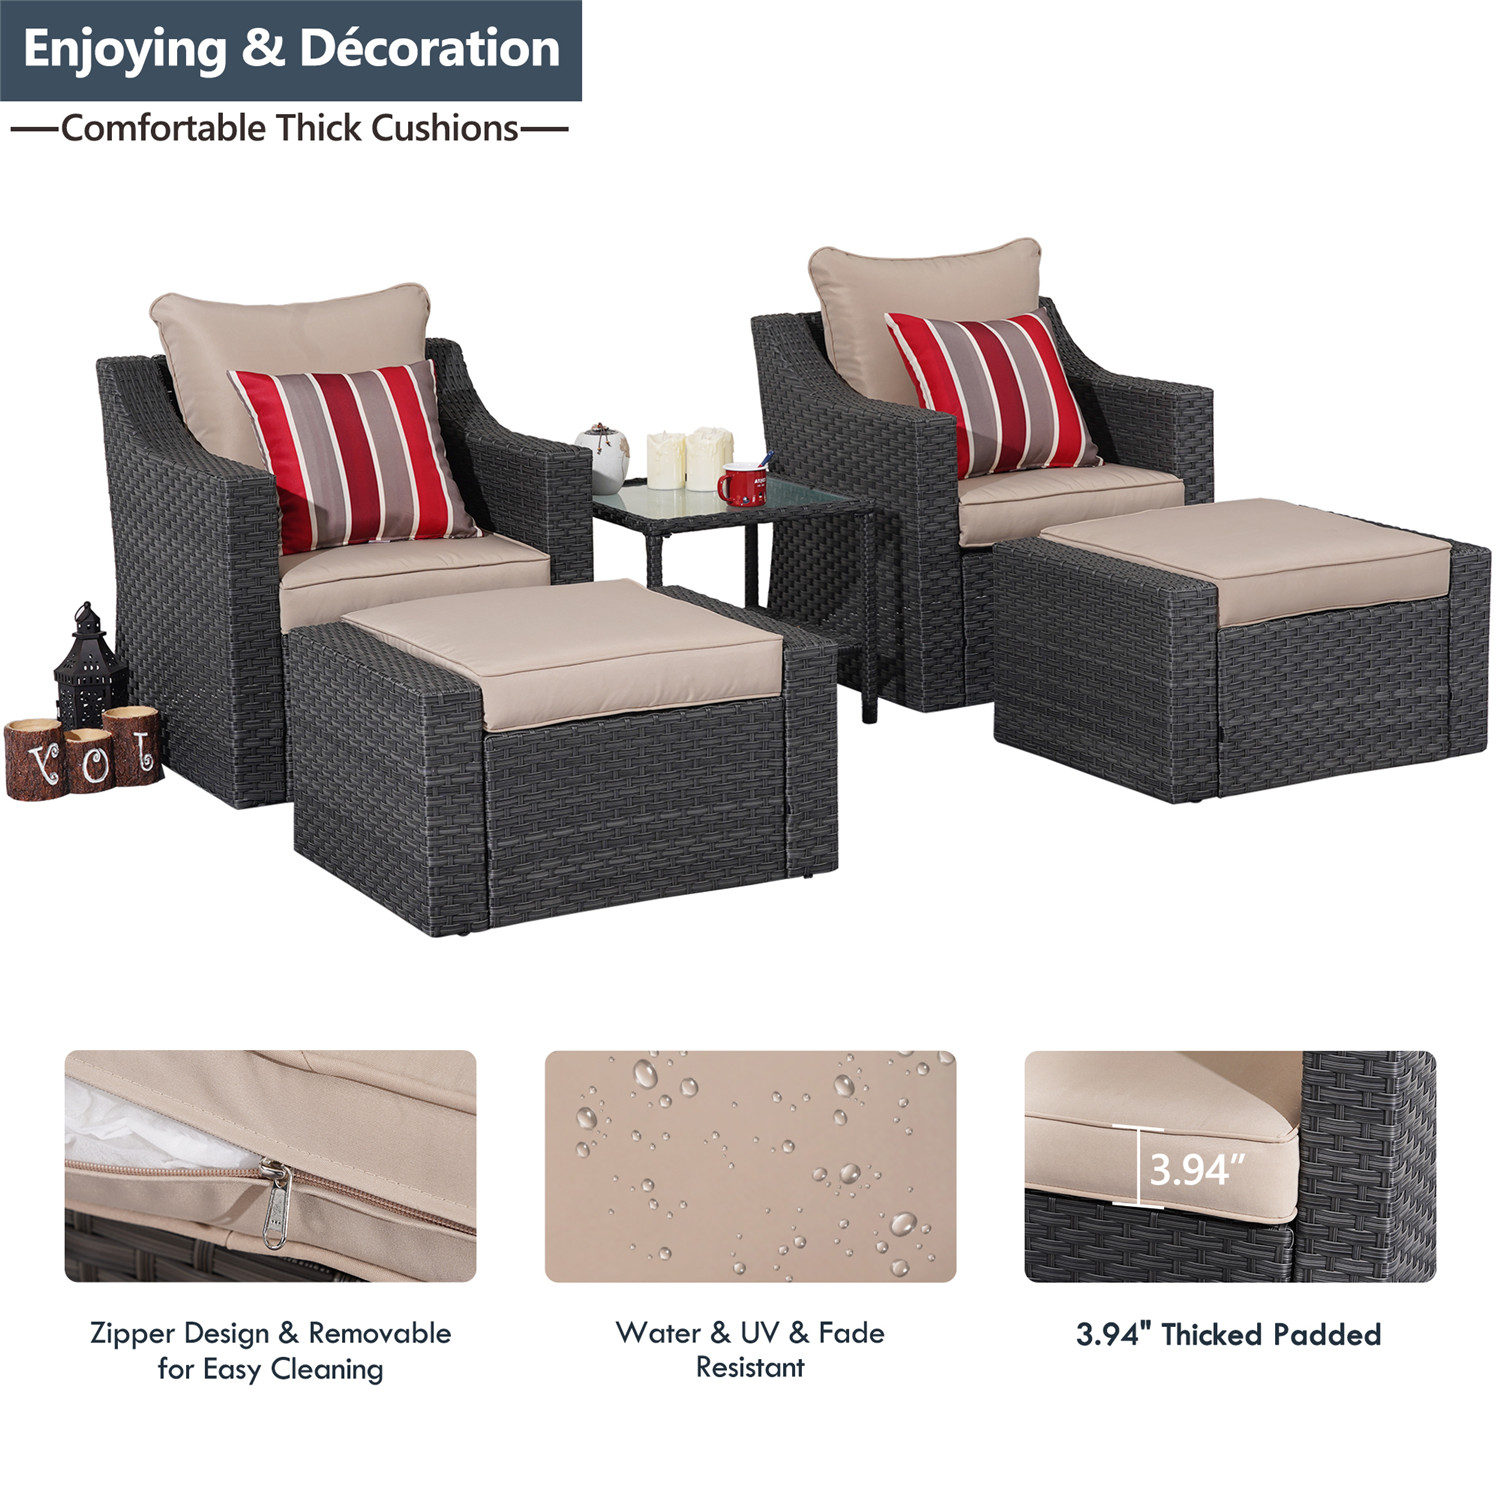 5 Pcs Outdoor Patio Furniture Set All Weather PE Rattan Wicker Cushioned Sectional Sofa Chairs with Ottomans and Side Table, Khaki - image 3 of 7